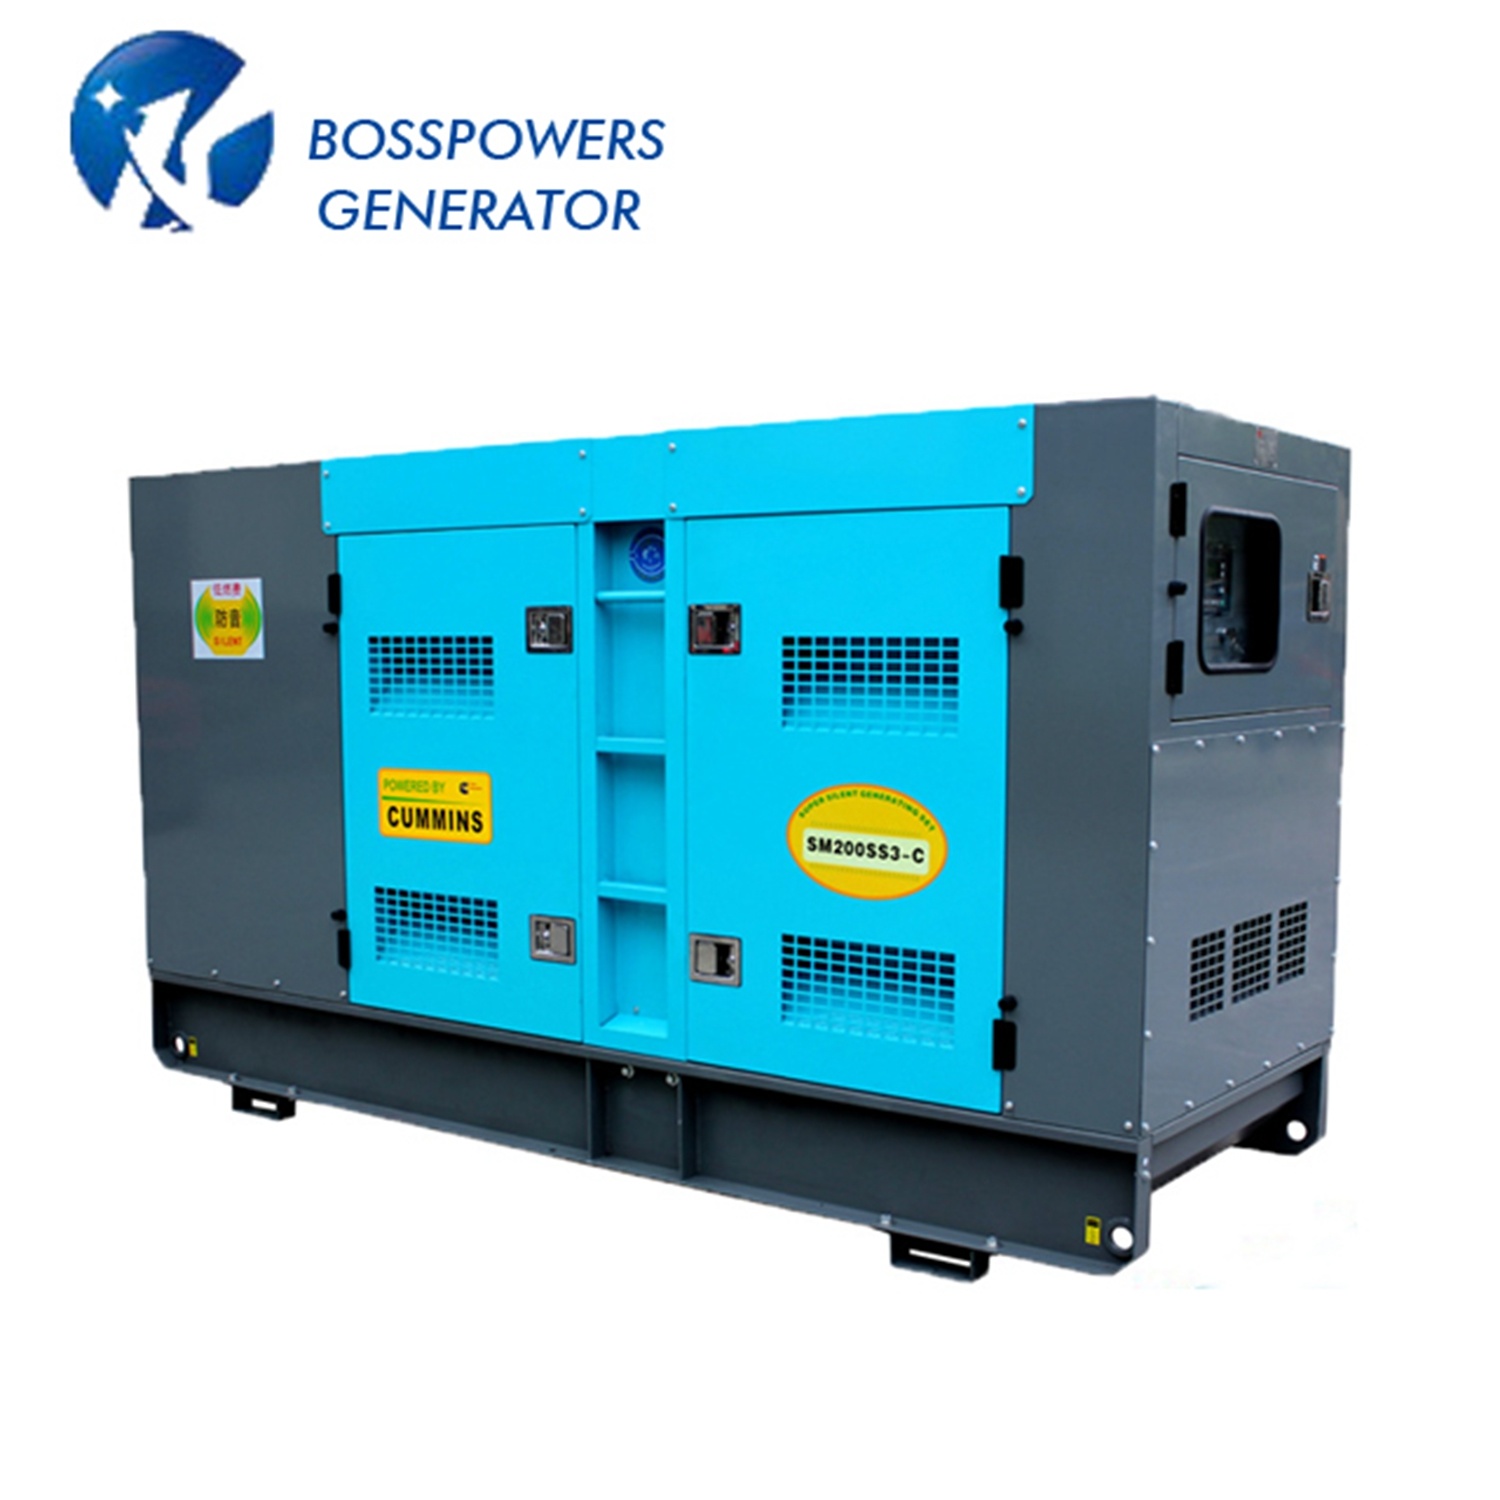 Rated Output 530kVA Diesel Powered Generator 8 Cylinder with Doosan Engine